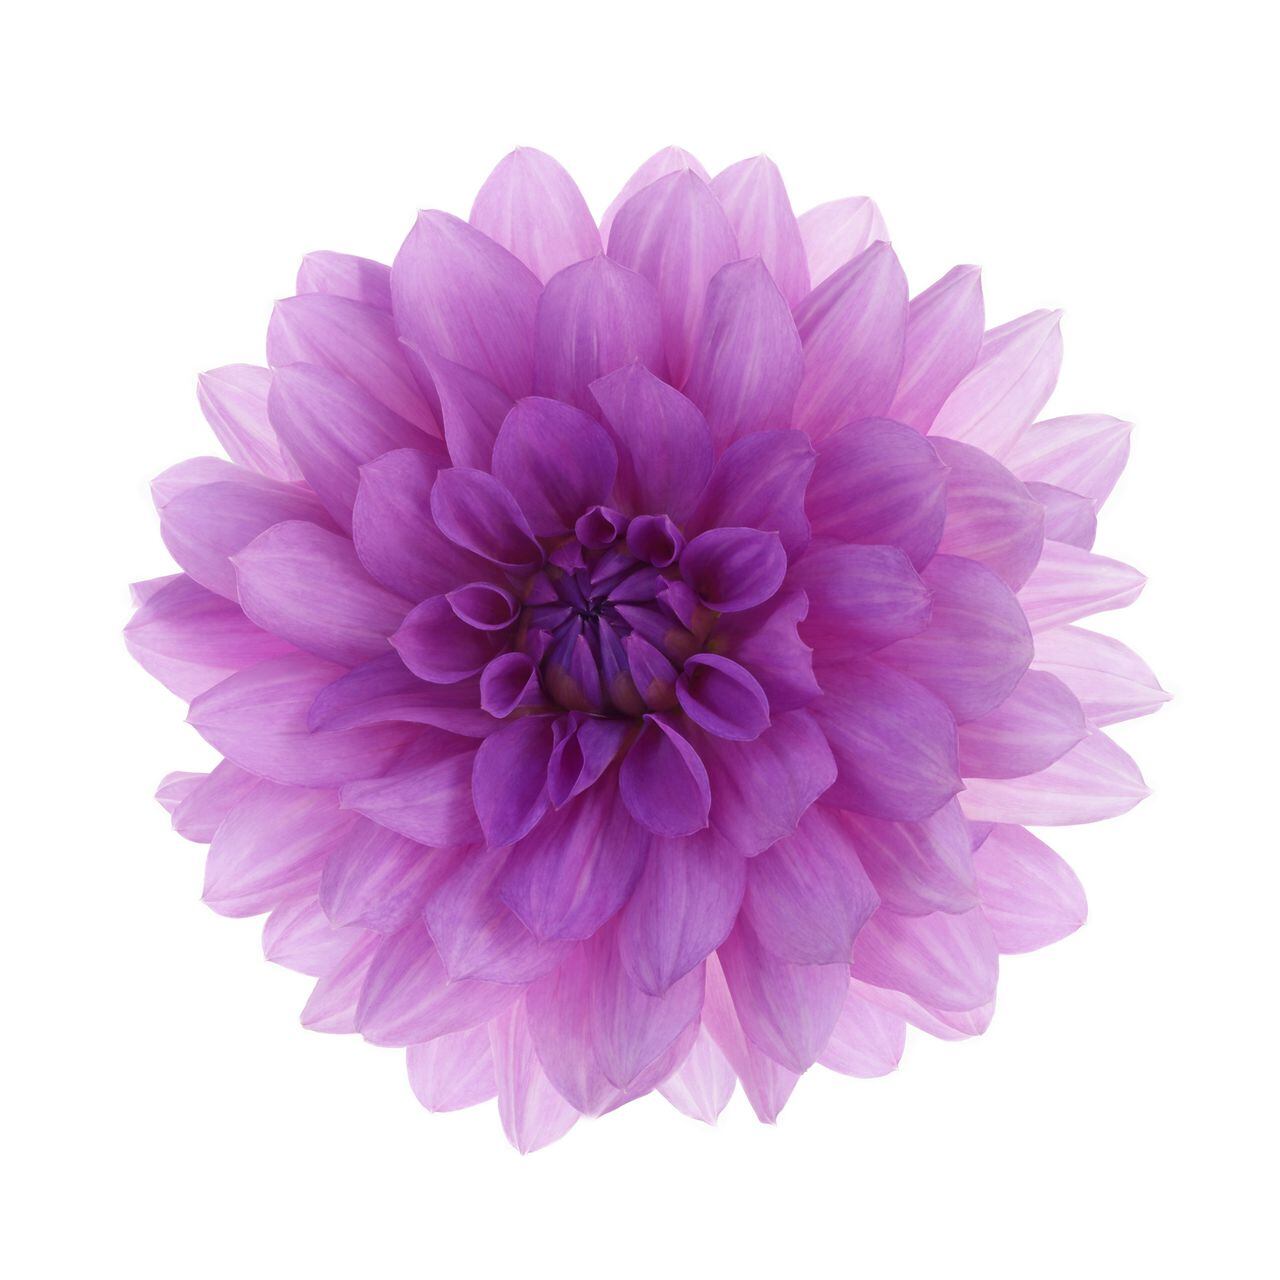 Close-up of purple dahlia flower, Dahlia 'Blue Boy', on a white background in square format with copy space.